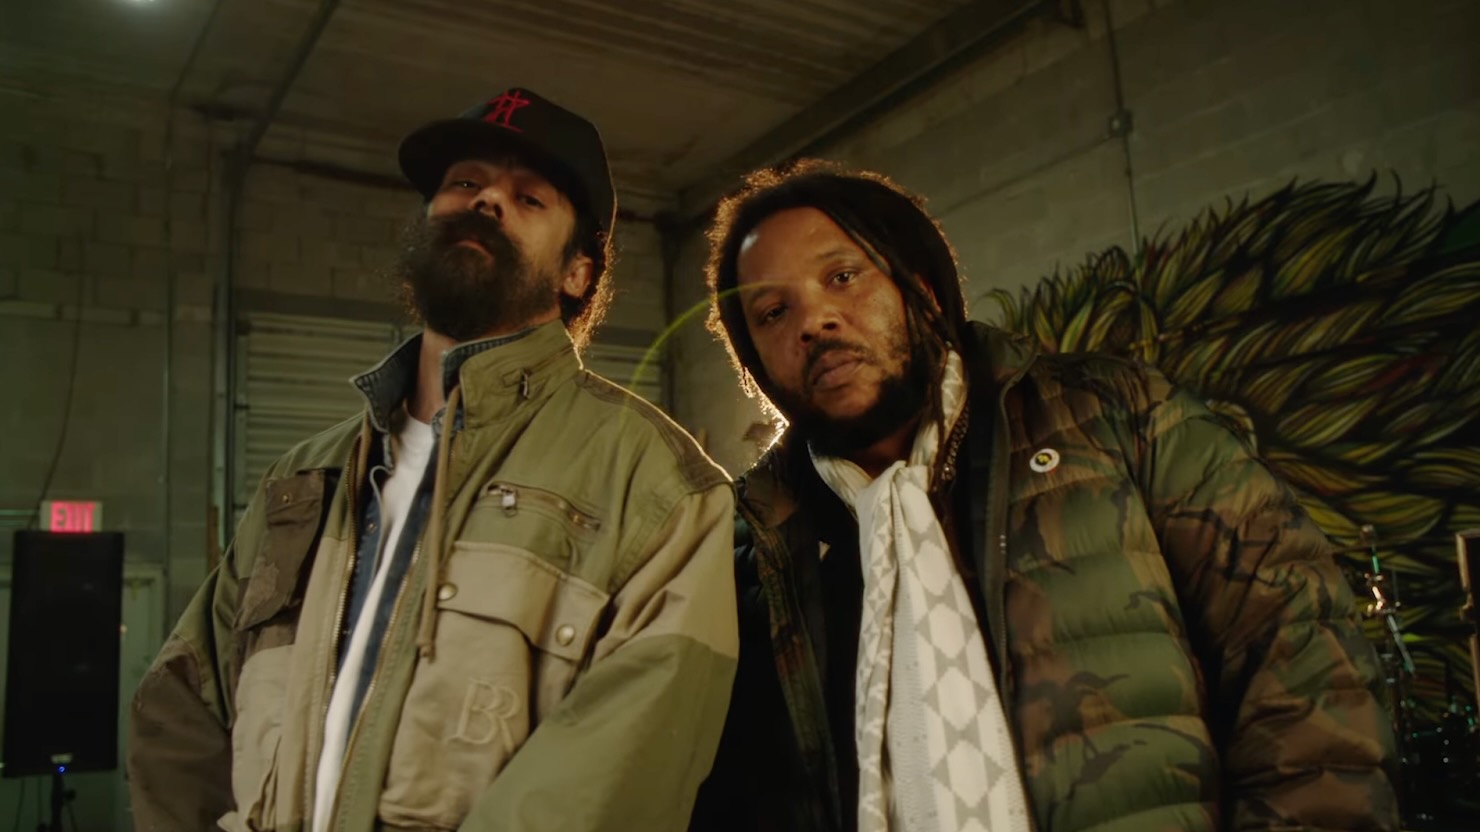 Damian “Jr. Gong” Marley and Stephen Marley Launch “Traffic Jam Tour”